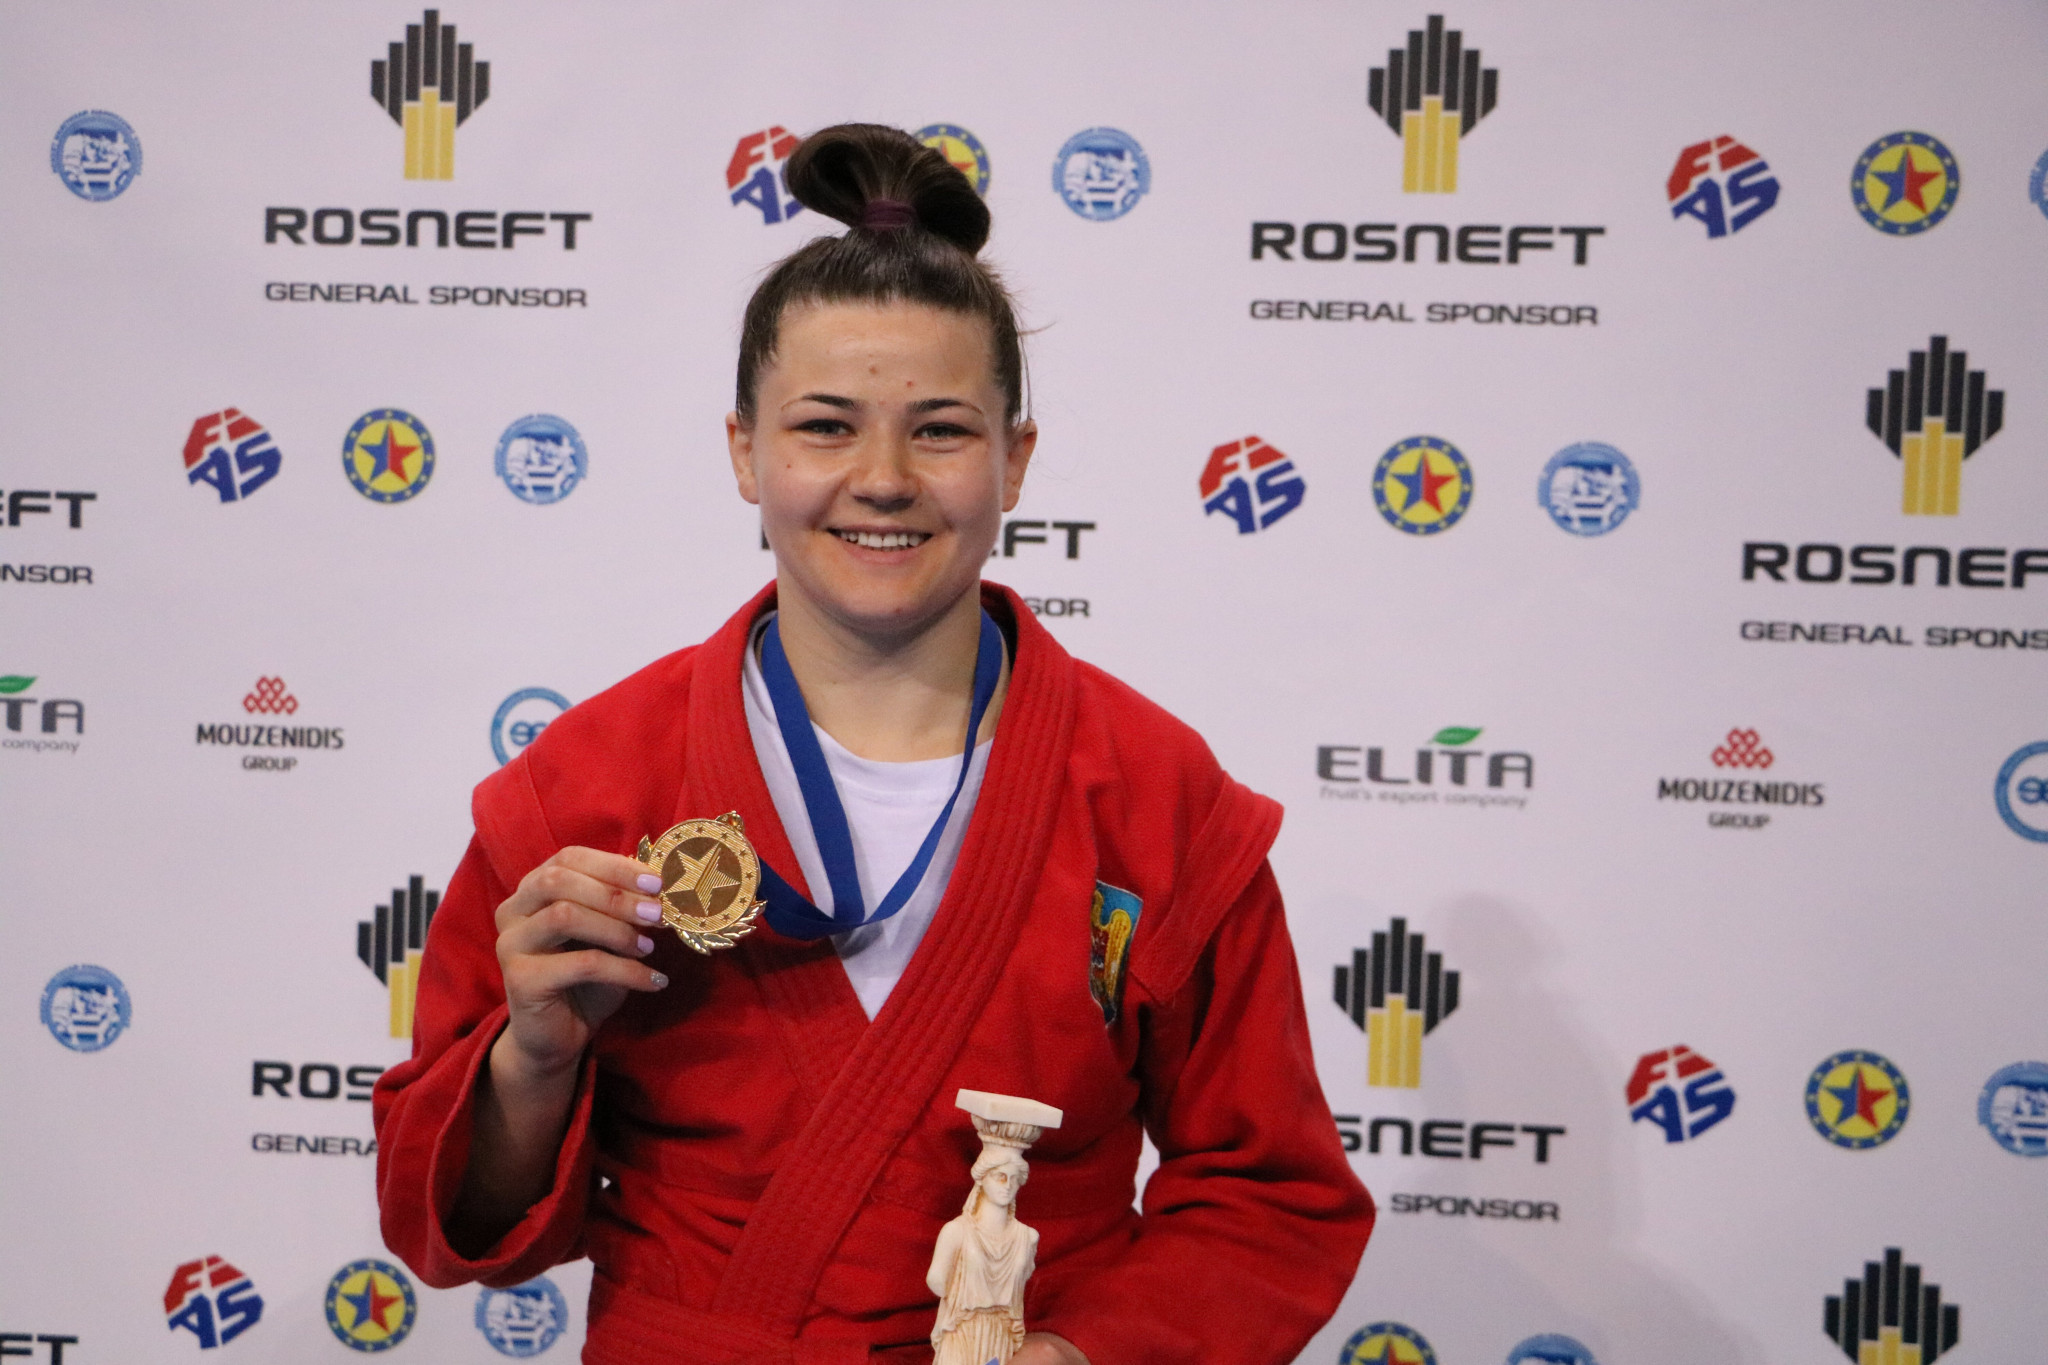 Moldova’s Natalia Budeanu was the only athlete to beat a Russian in a final today, defeating Irina Gromova in the women's 68kg division ©FIAS